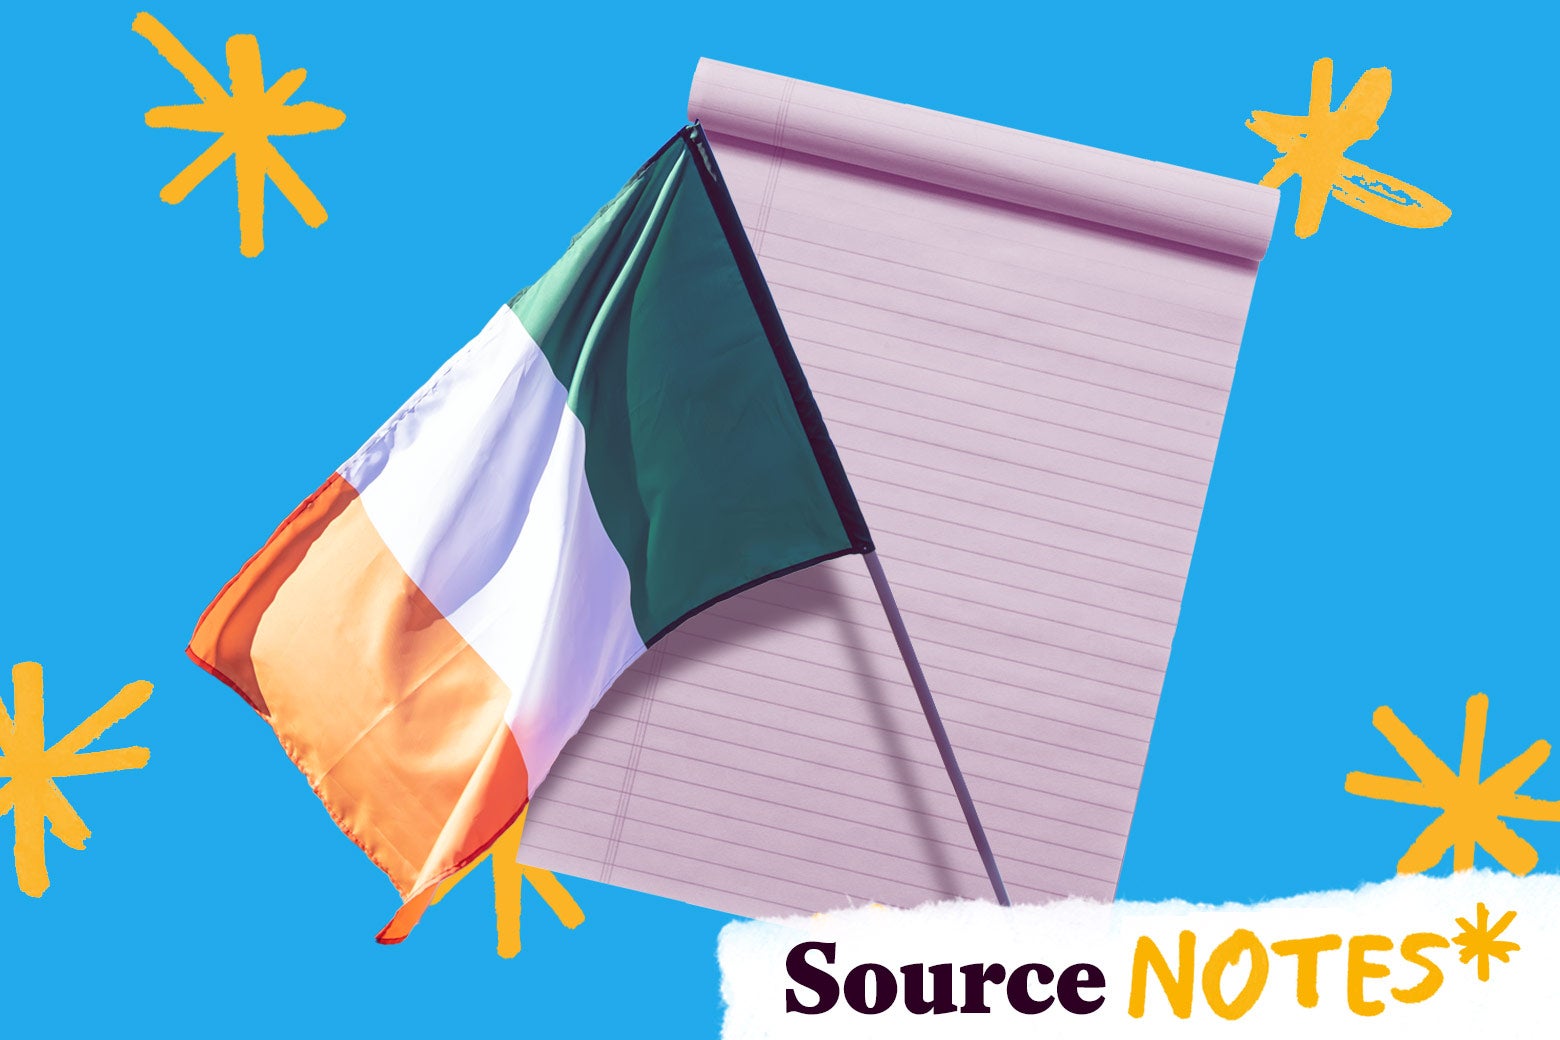 Irish flag on top of a legal pad of paper.